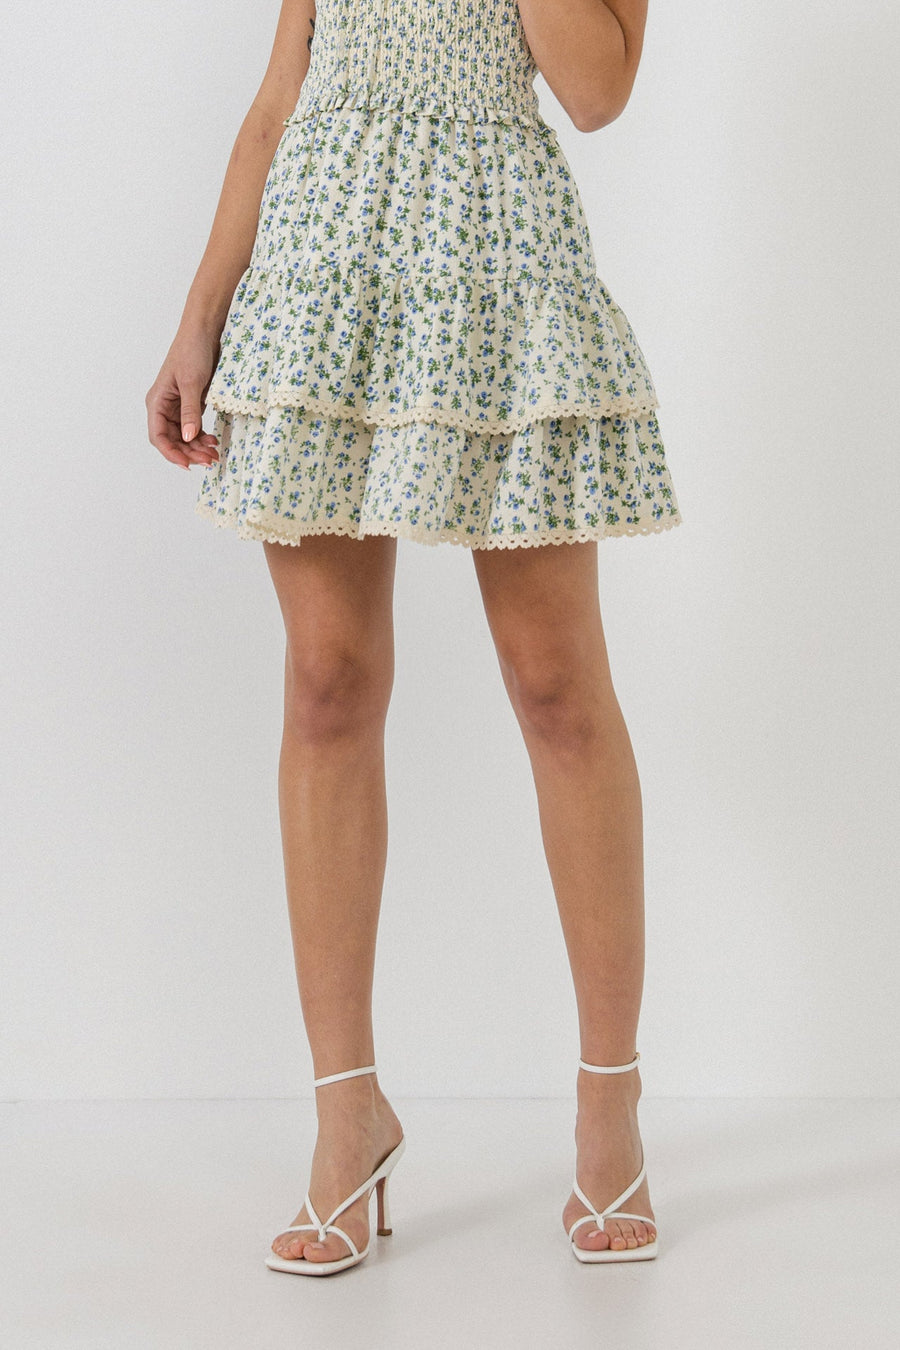 FREE THE ROSES-Floral Lace Trim Detail MIni Skirt-sale available at Objectrare